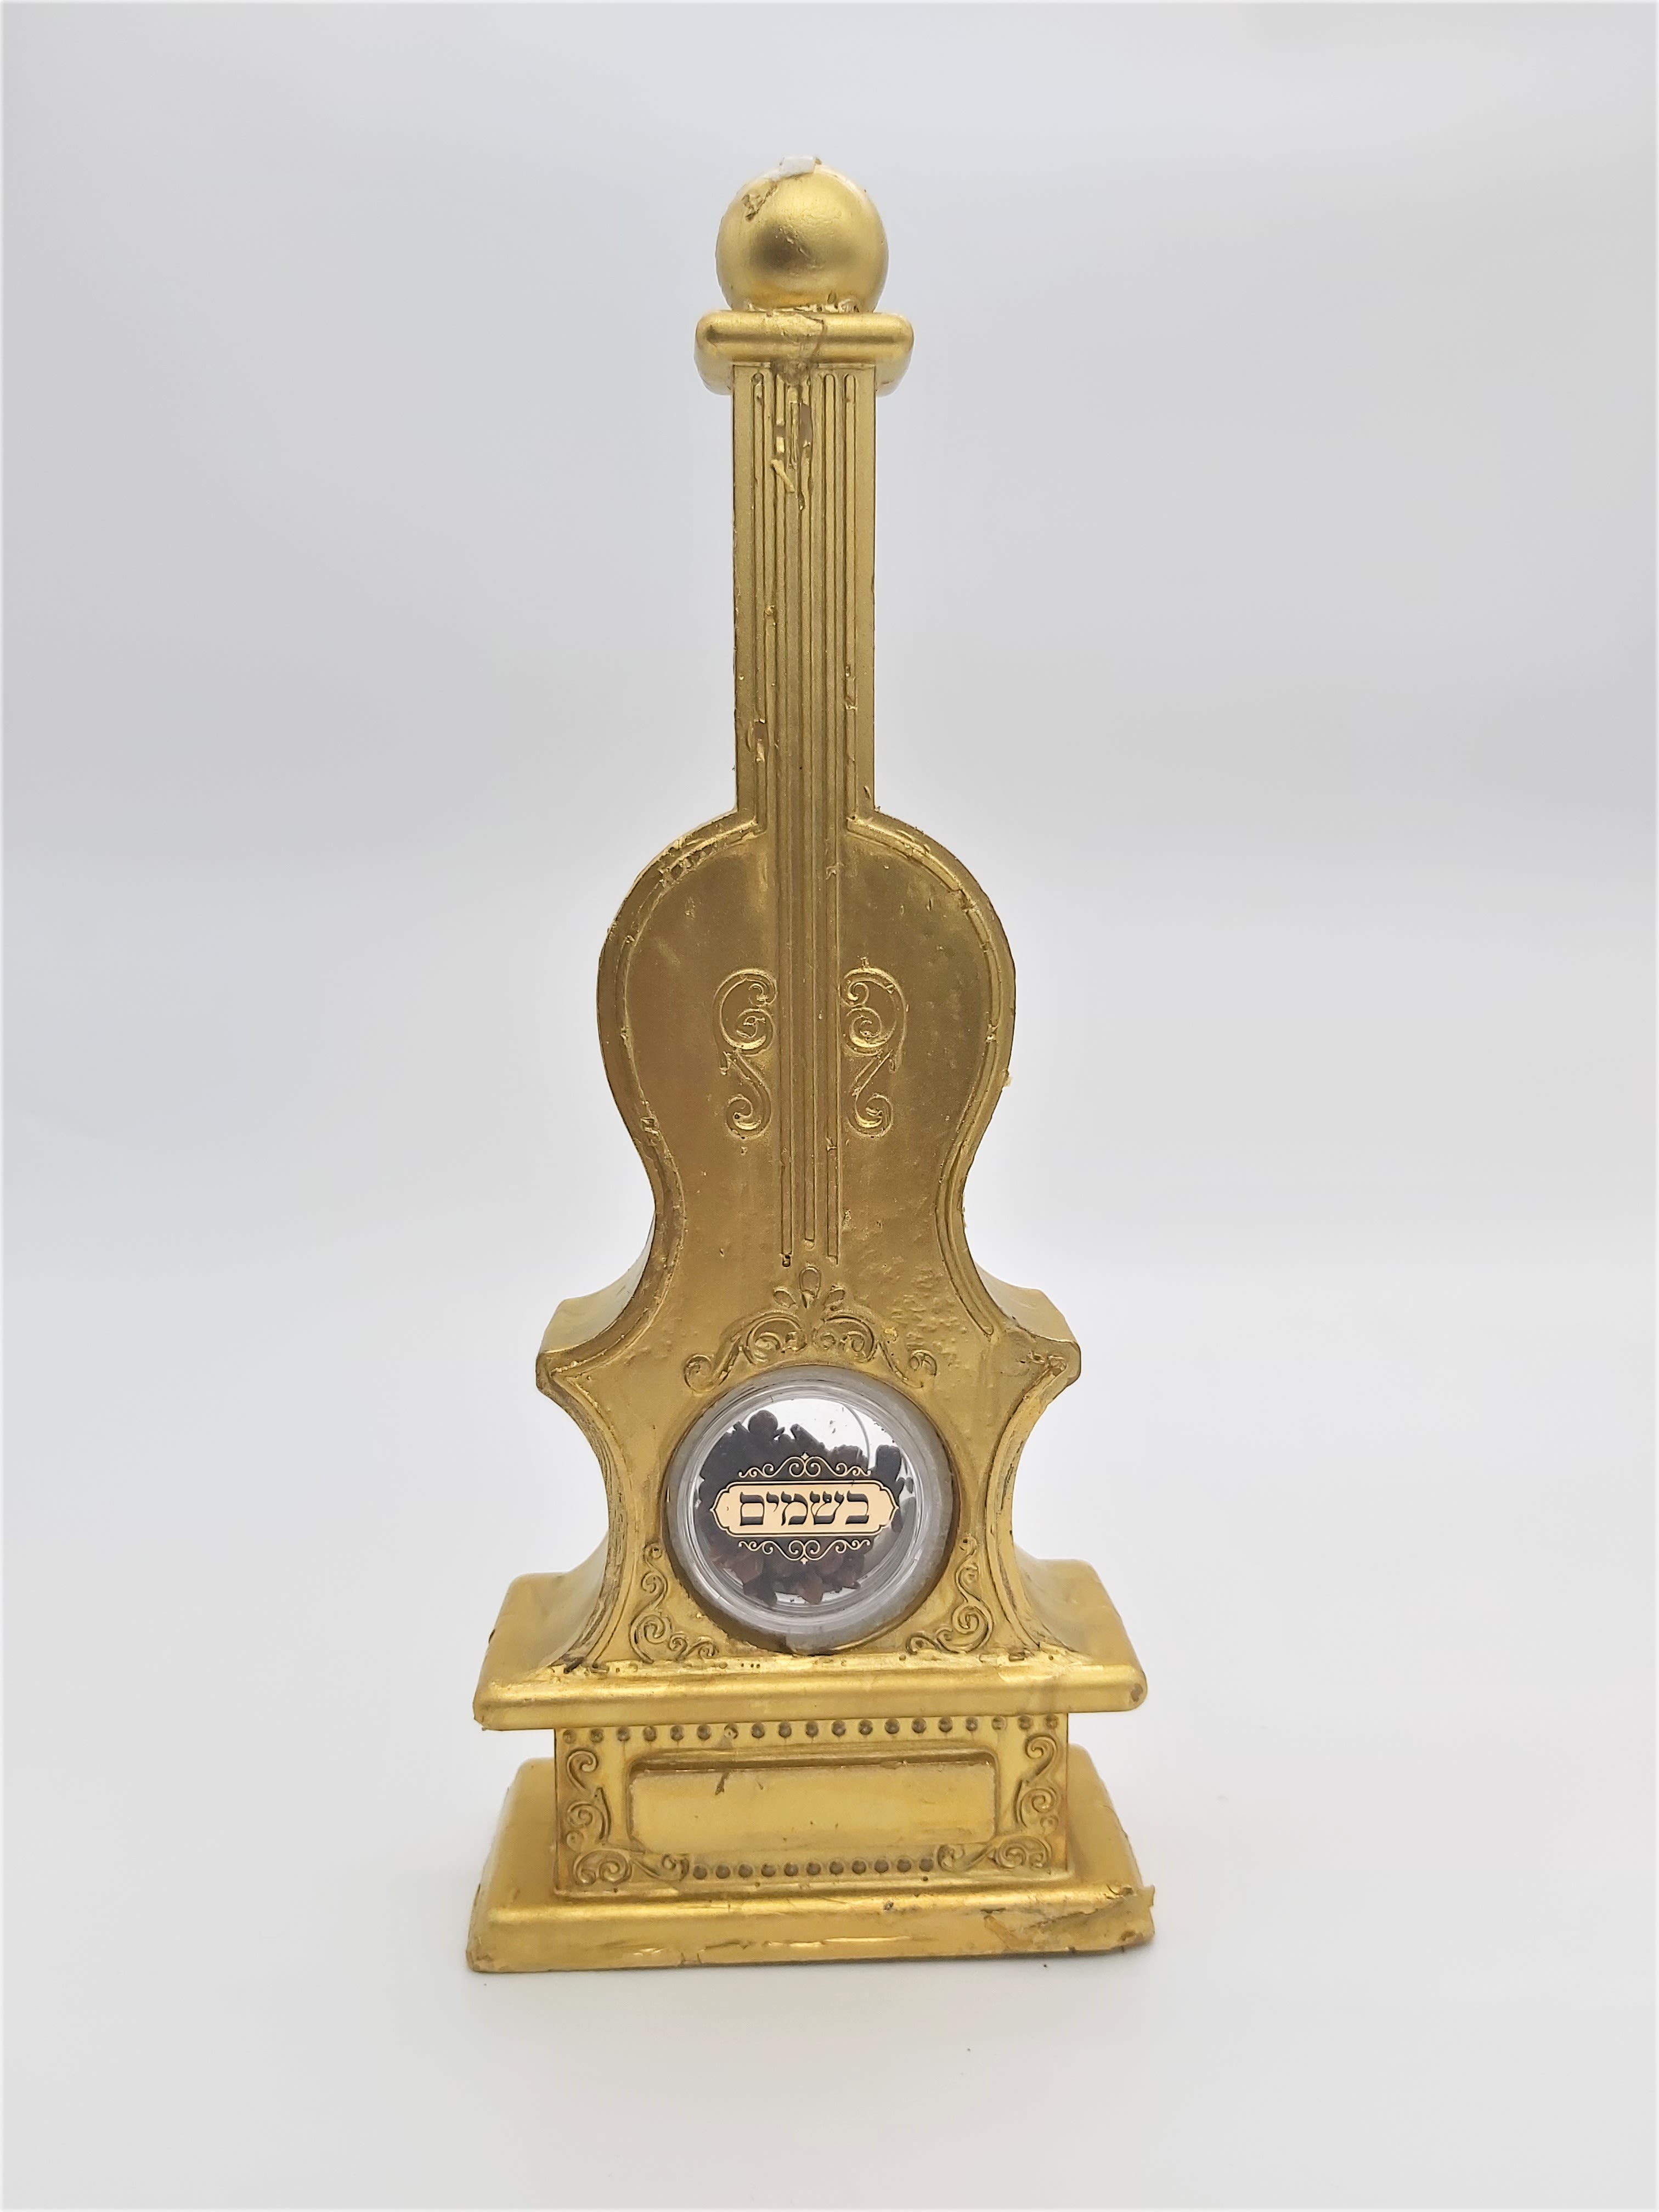 Violin-Shaped, Gold-Colored Havdalah Candle with Spices